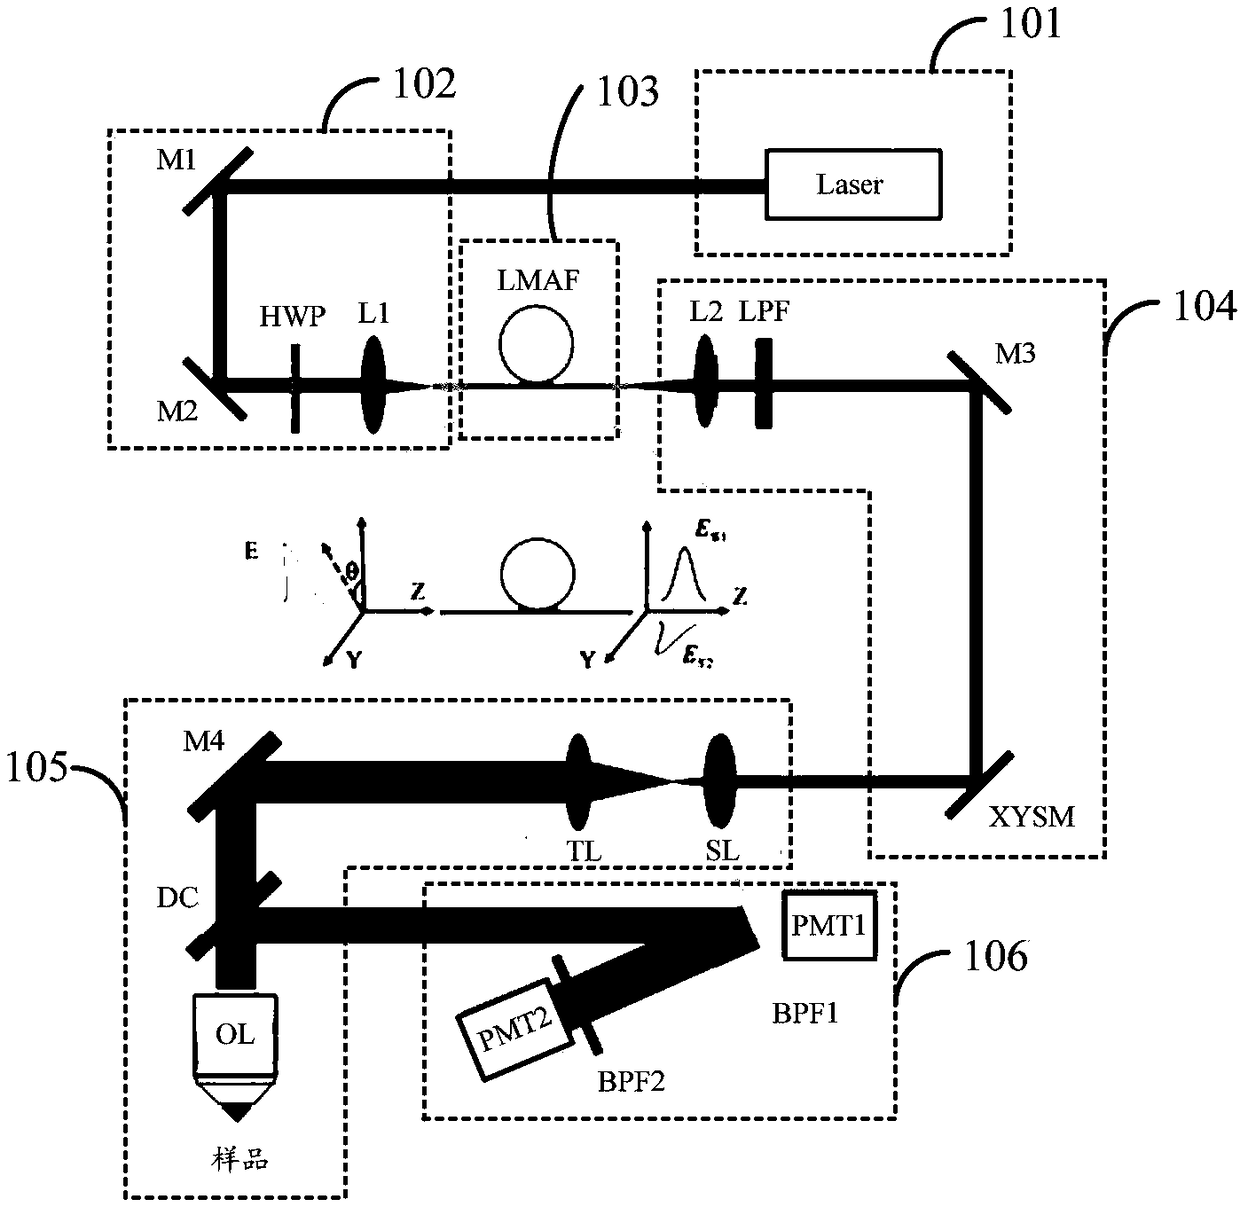 Self-reference measuring device for axial chromatic aberration of multiphoton microscope